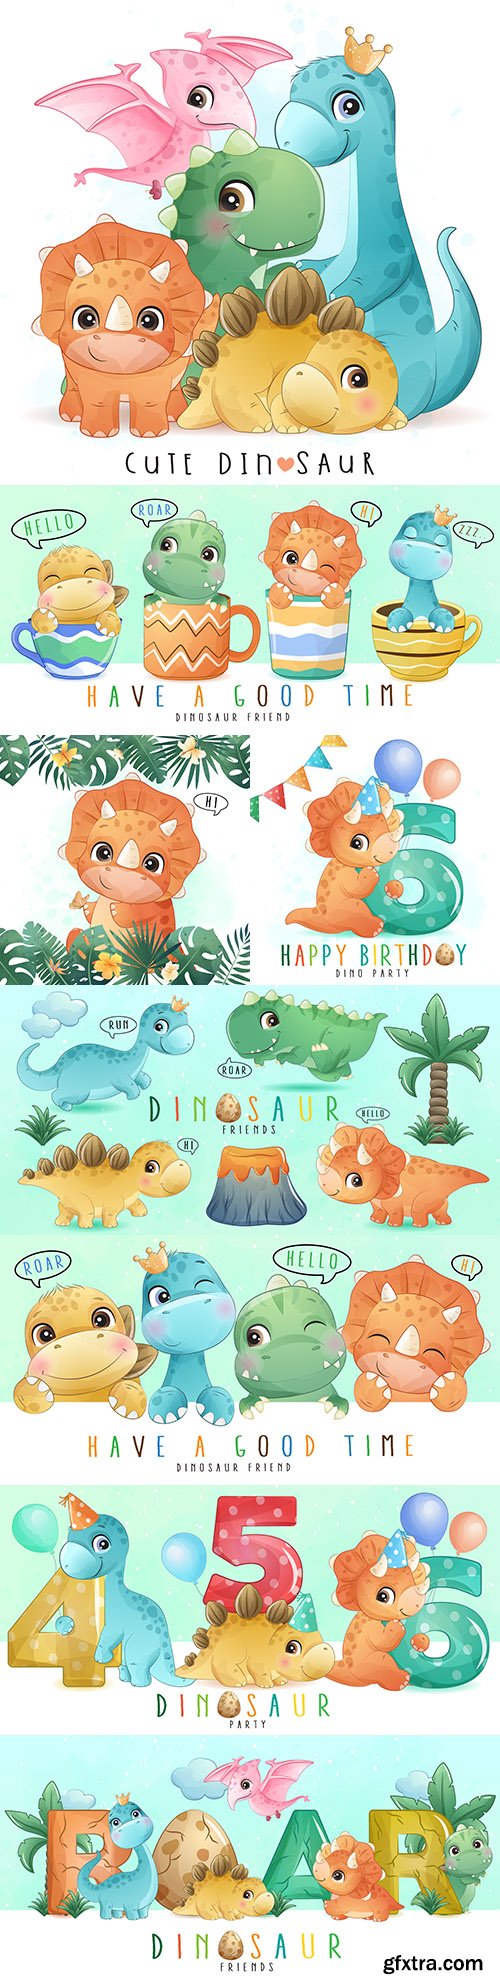 Cute little dinosaur watercolor illustrations collection
